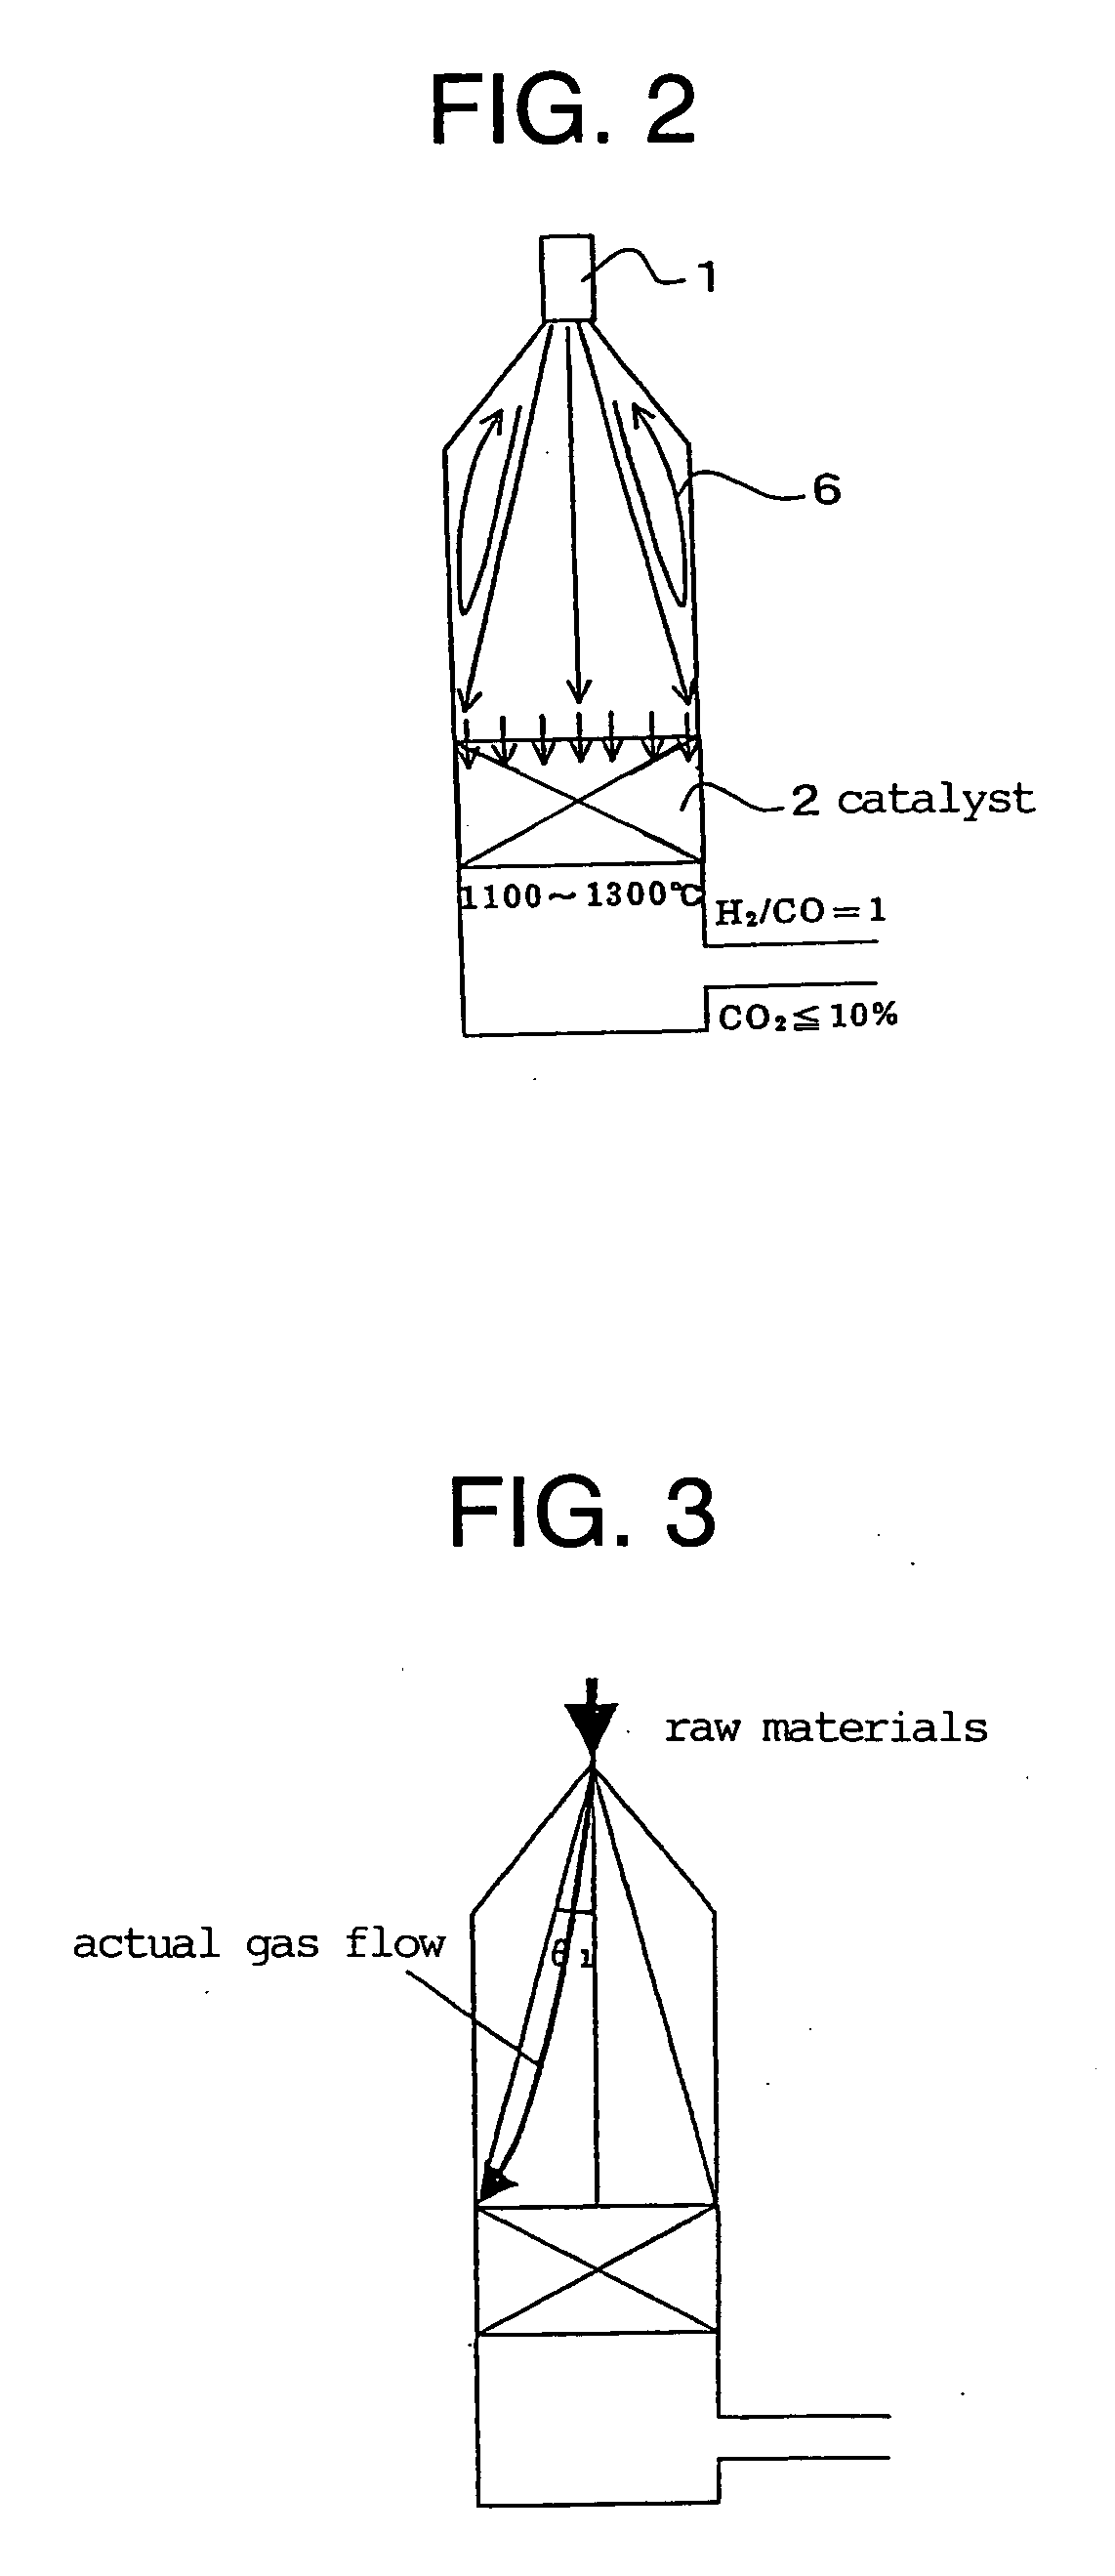 Method for preparing synthesis gas, method for preparing dimethyl ether using synthesis gas, and furnace for preparing synthesis gas